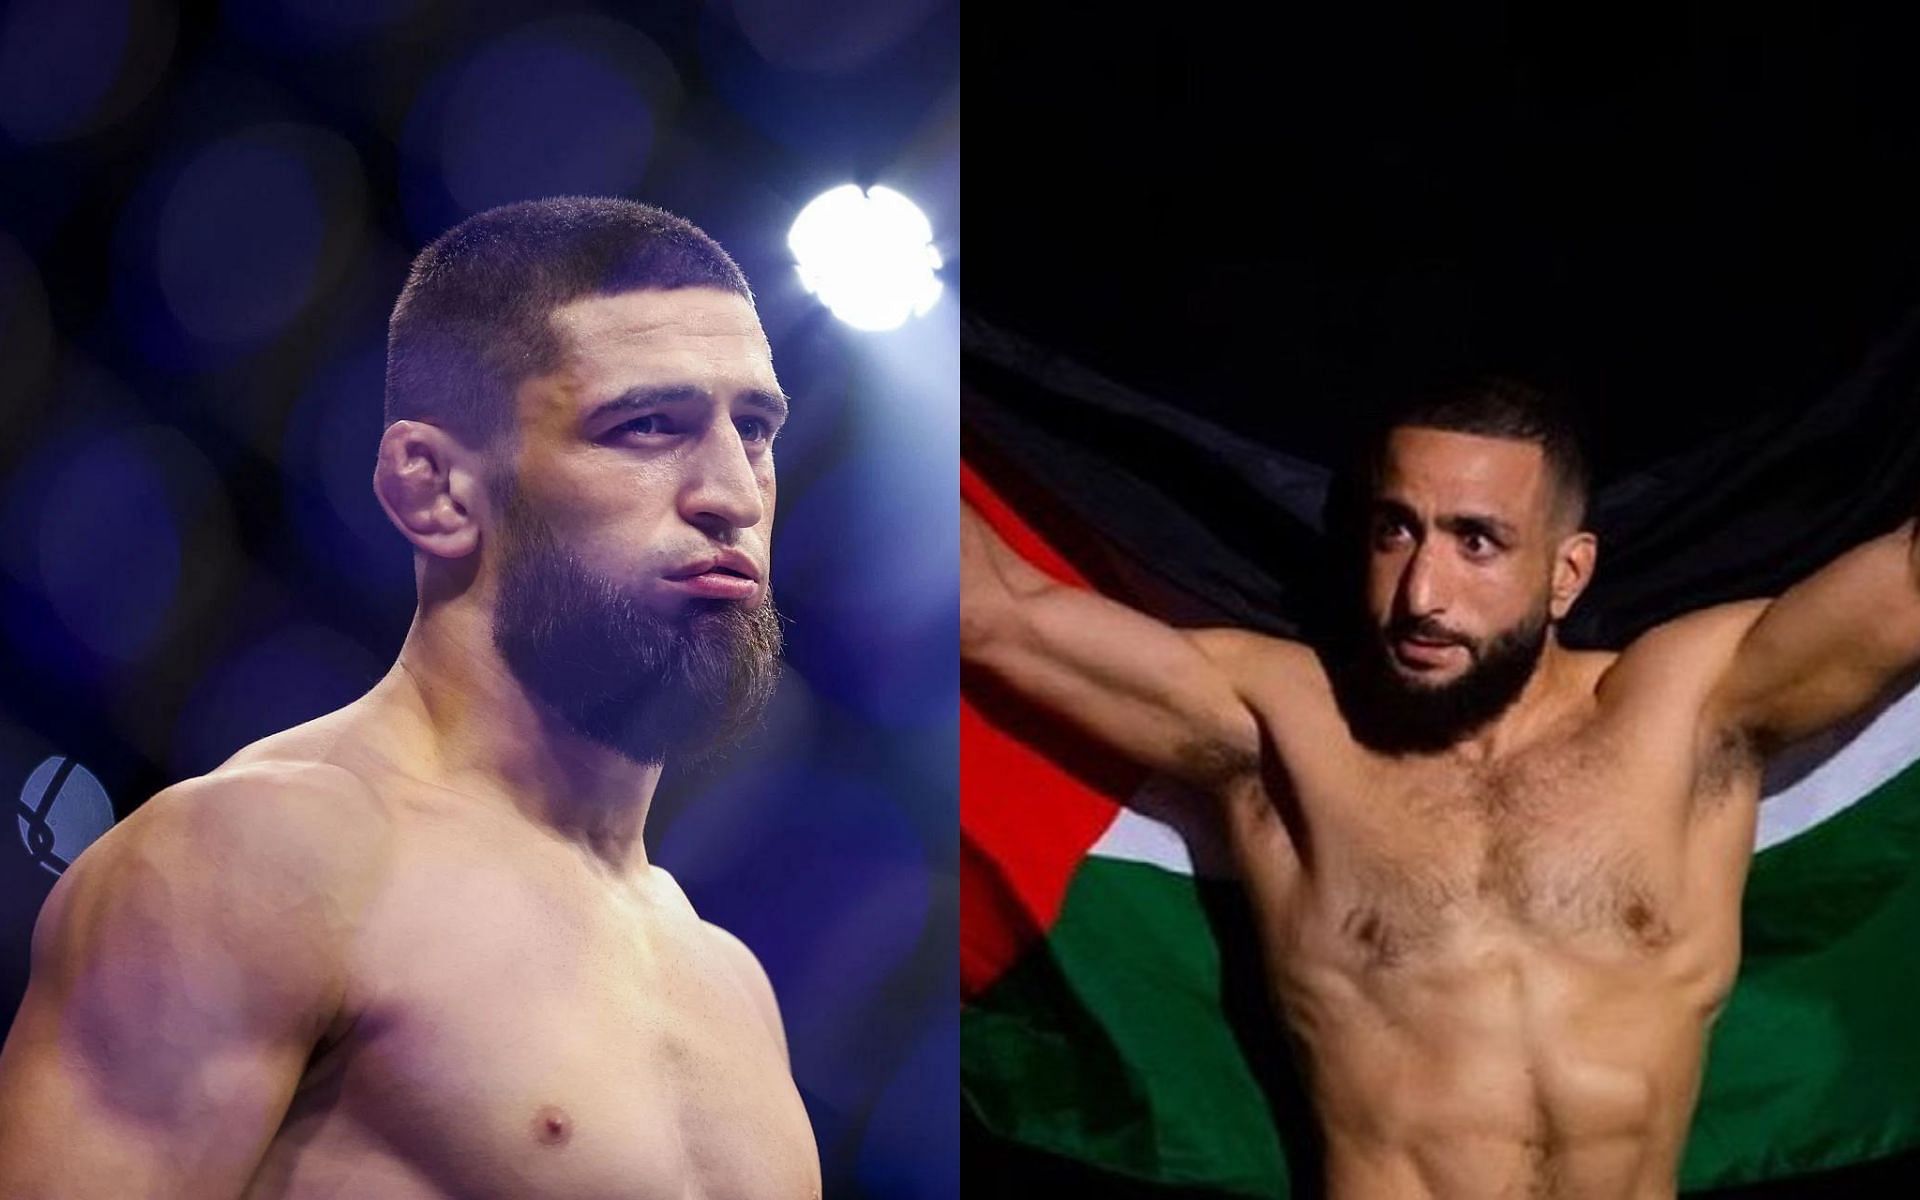 Khamzat Chimaev (Left) and Belal Muhammad (Right) (Images courtesy of Getty and @bullyb170 Instagram)